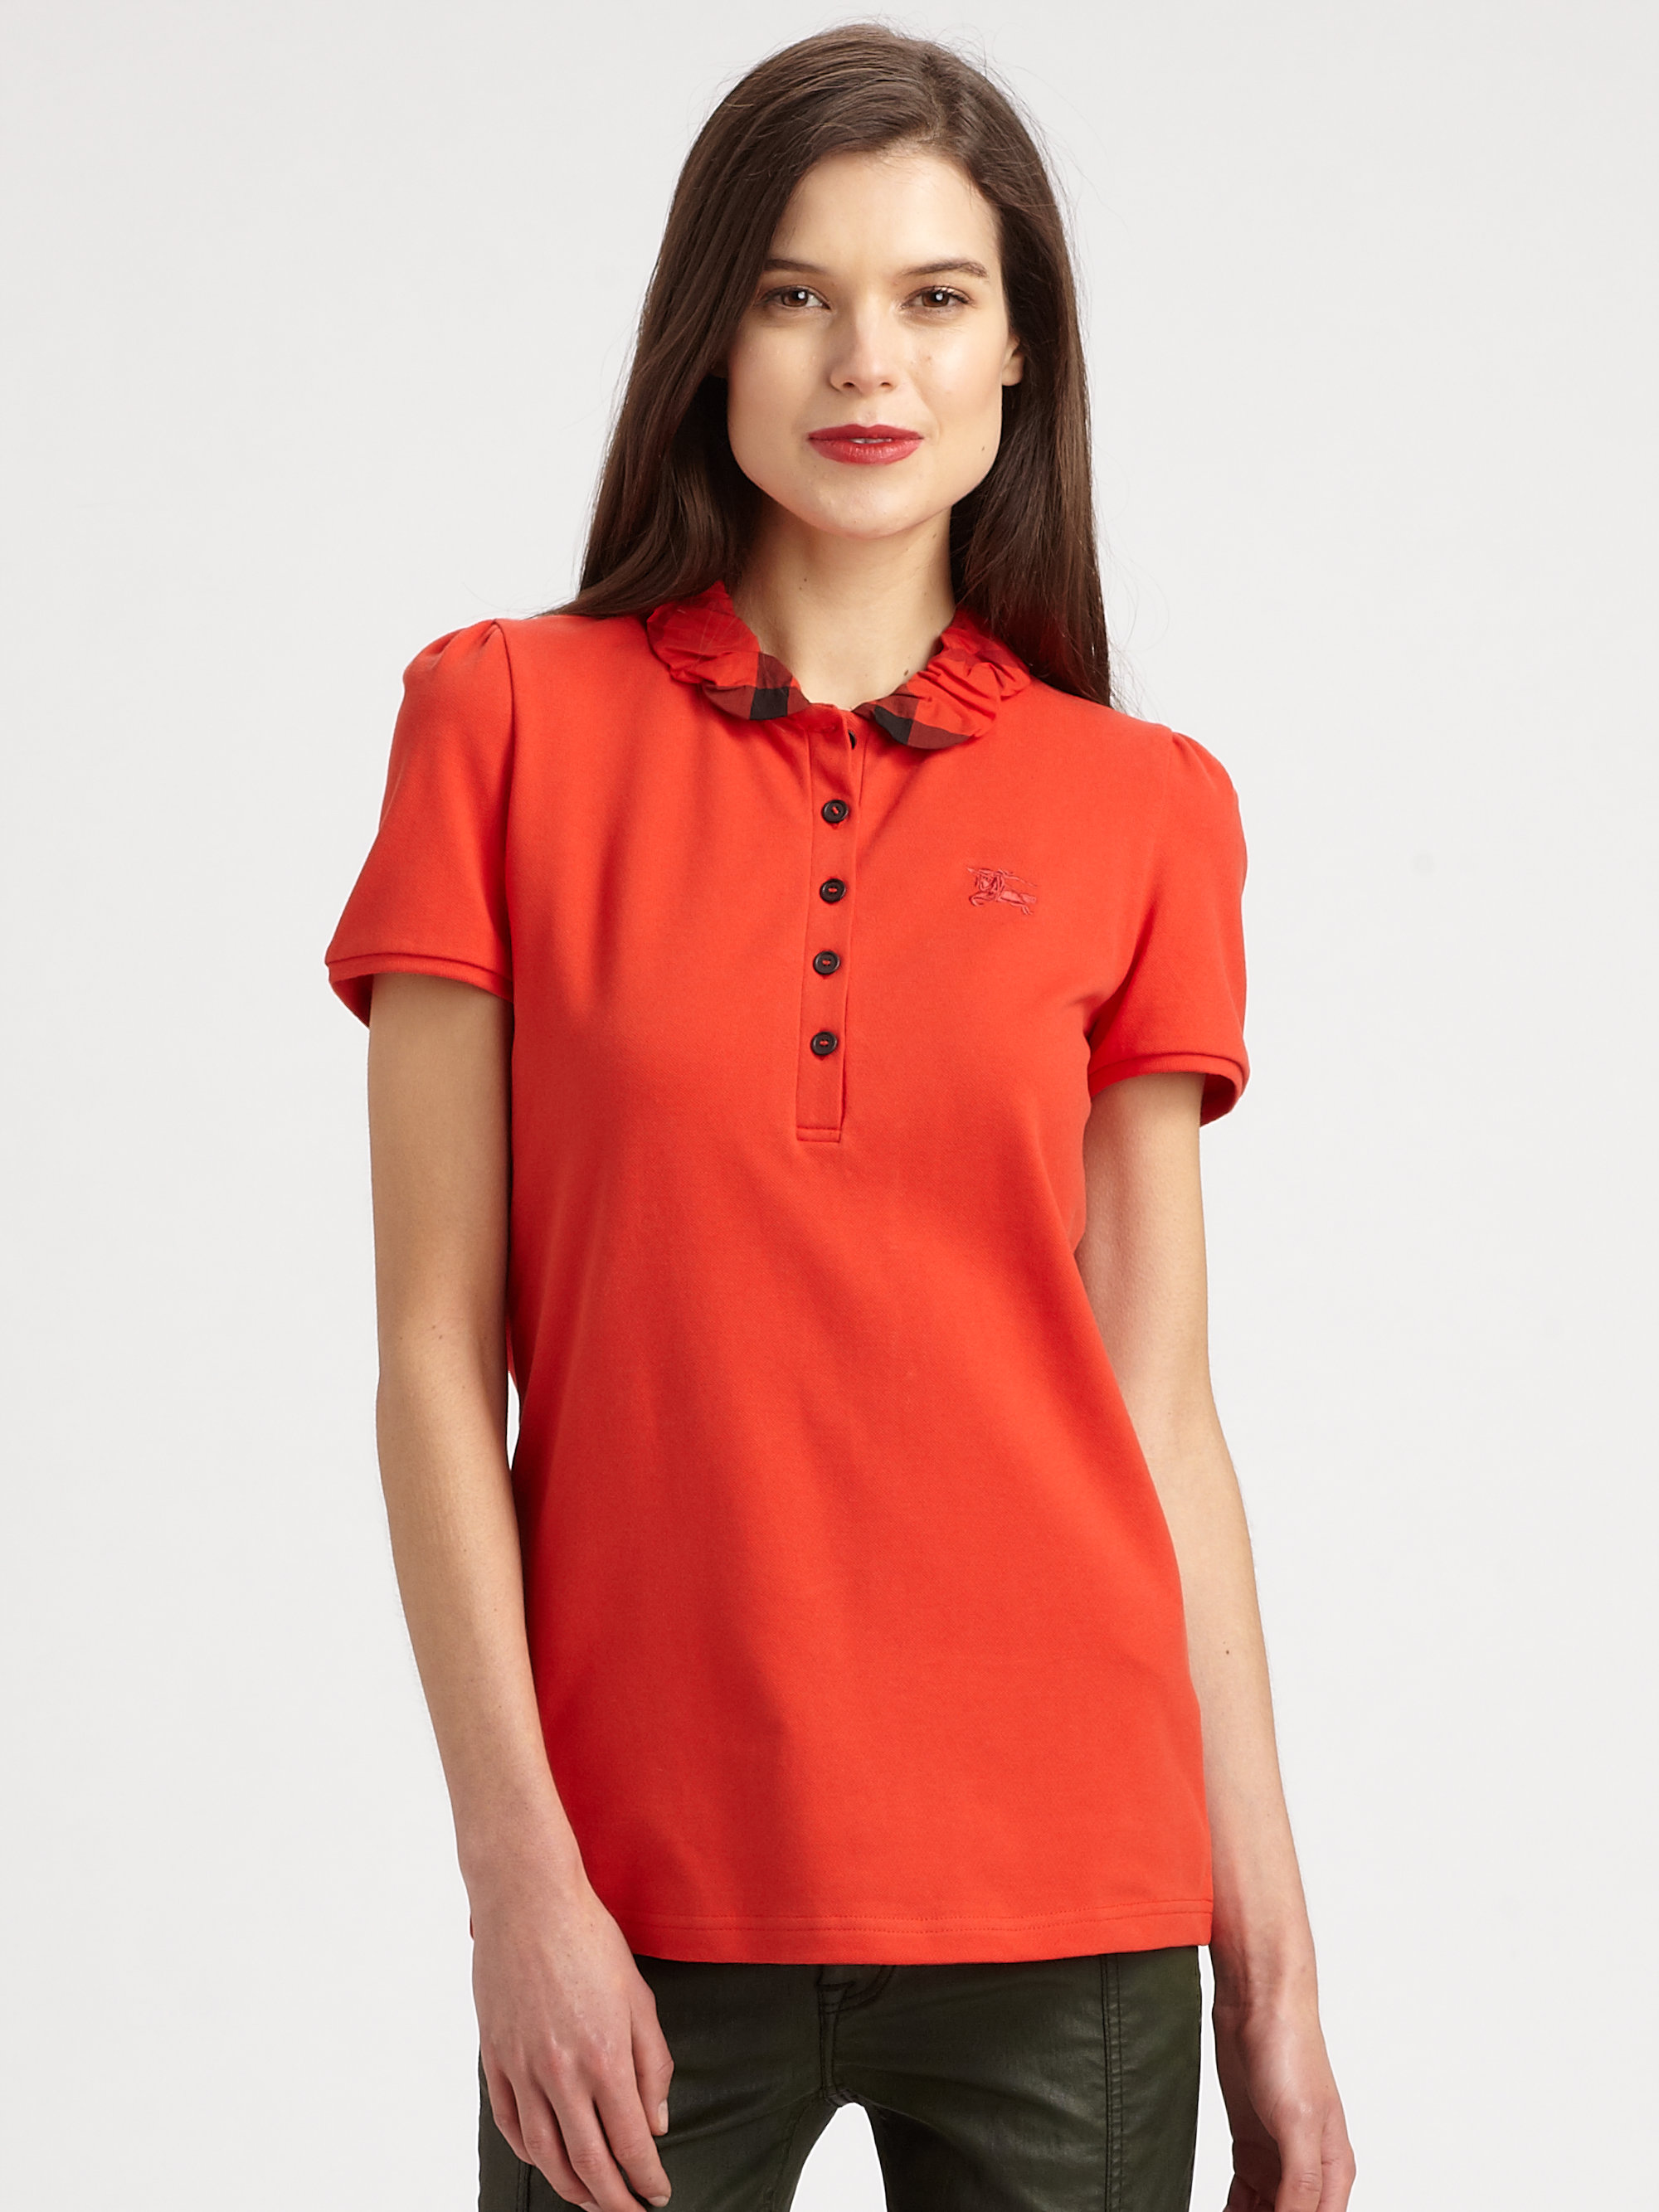 burberry polo womens for sale